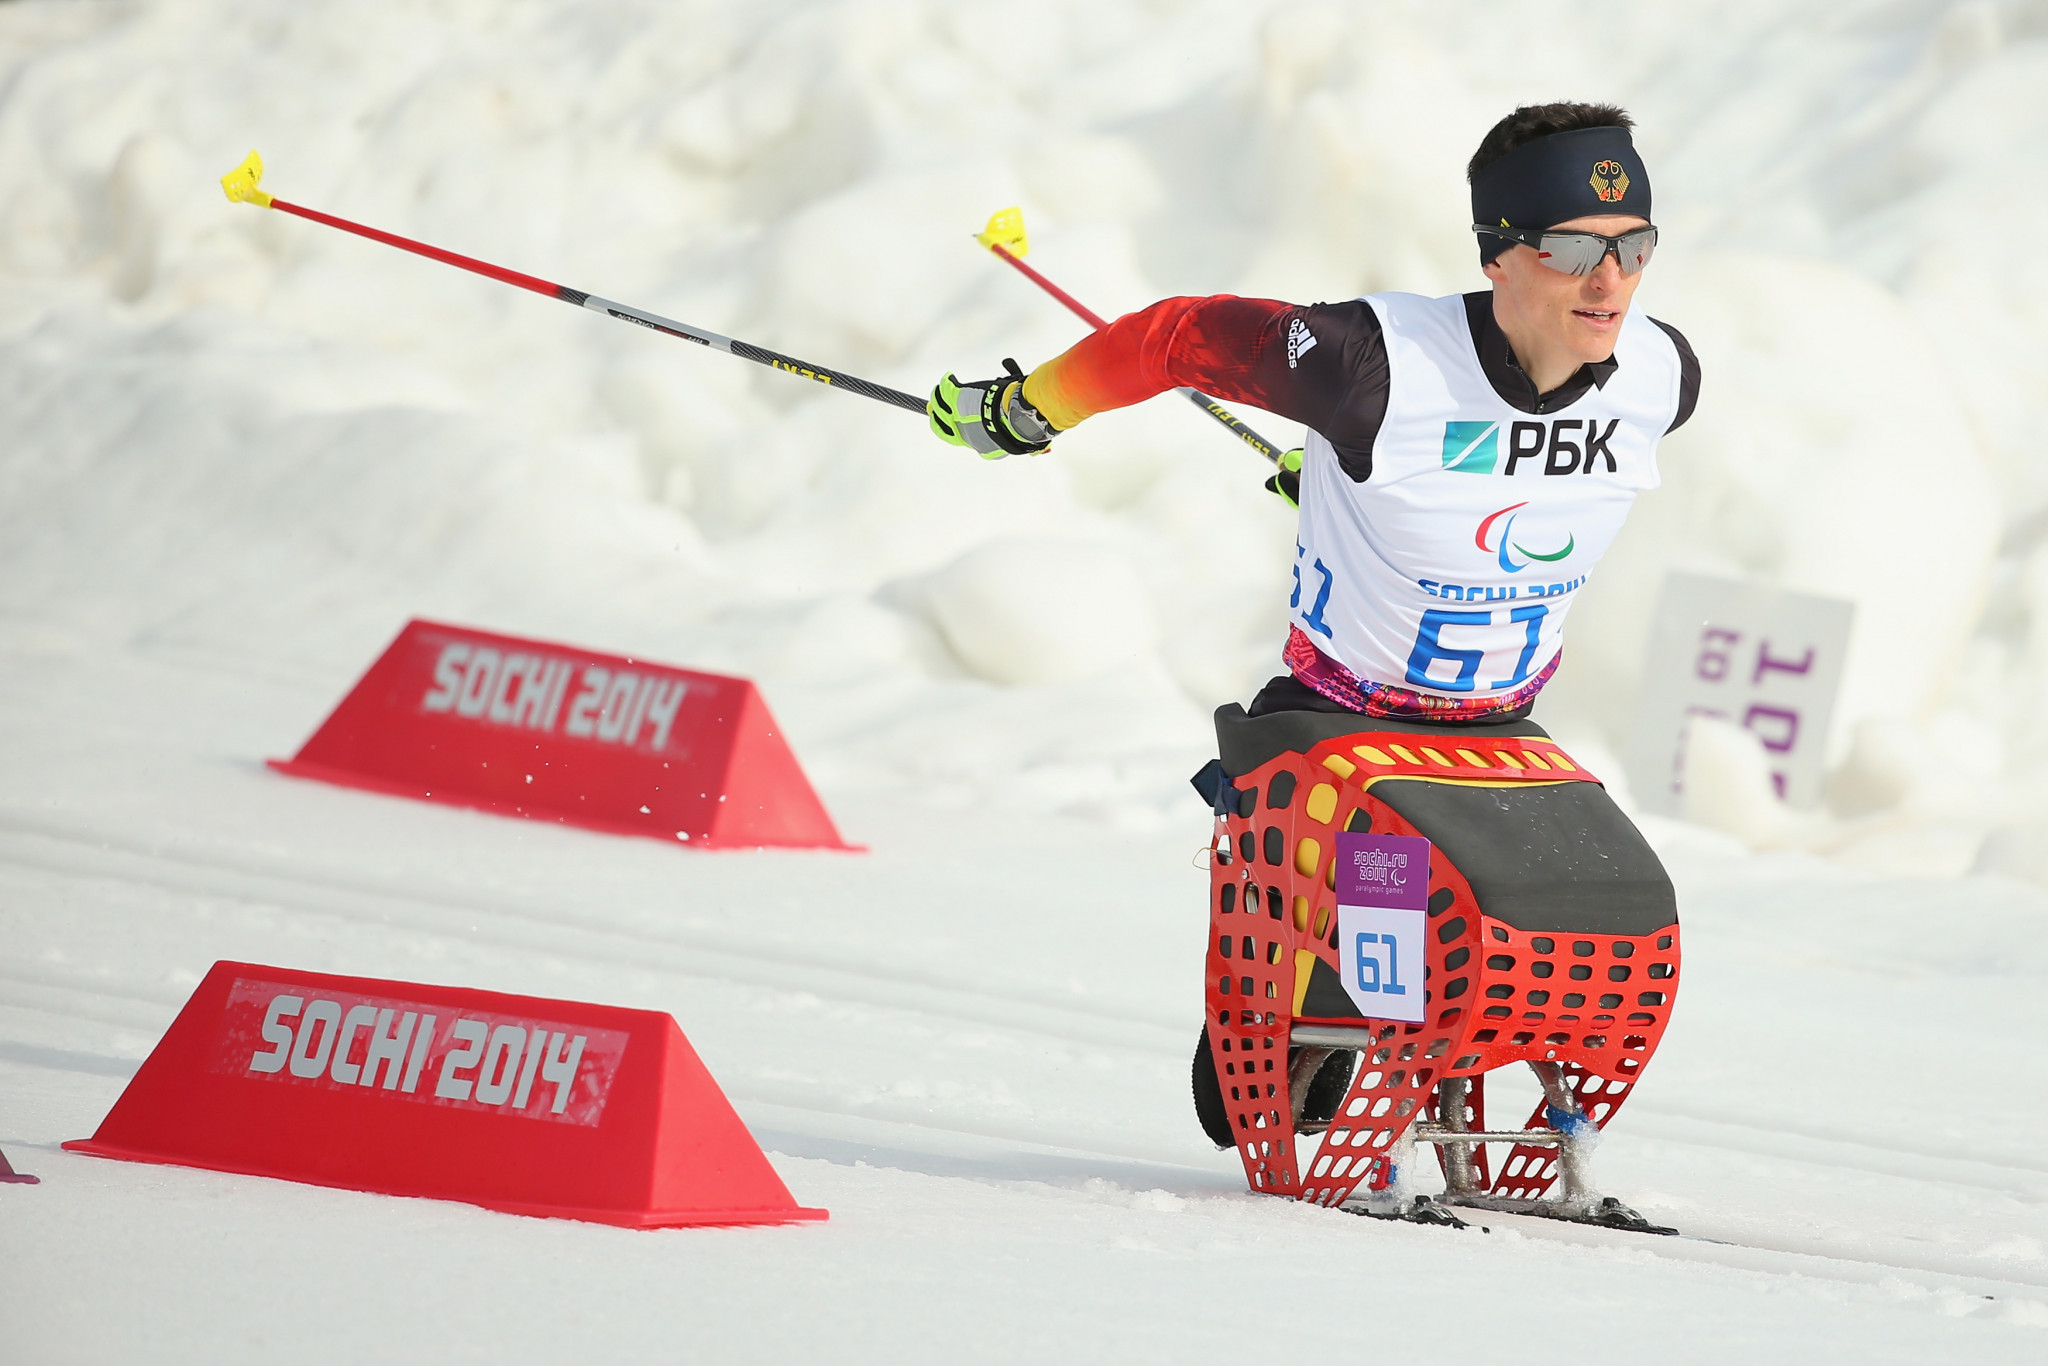 Home athletes set to dominate World Para Nordic Skiing World Cup in Oberried